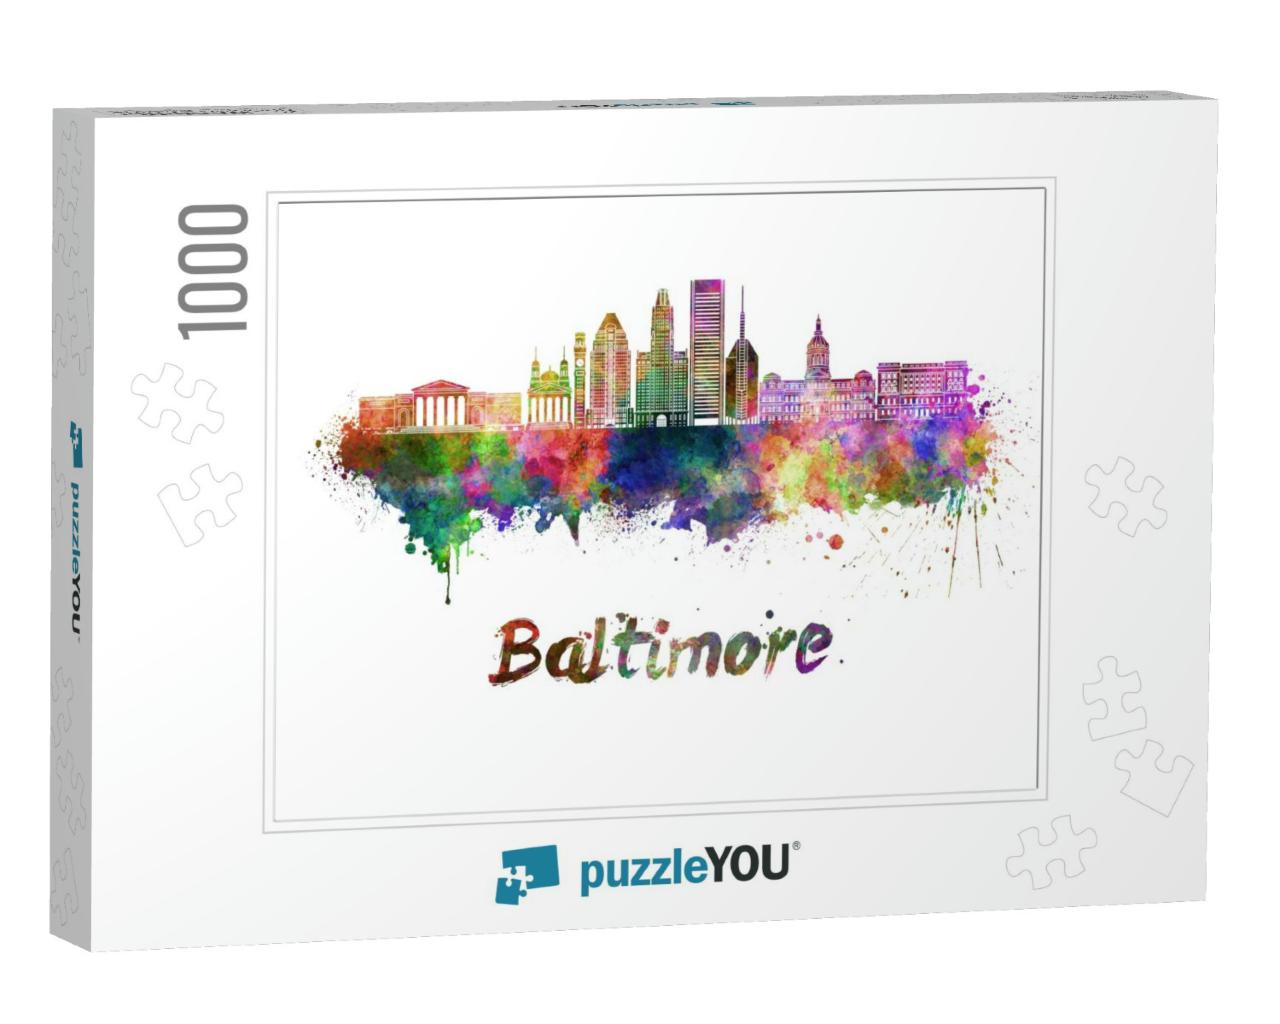 Baltimore Skyline in Watercolor Splatters with Clipping P... Jigsaw Puzzle with 1000 pieces